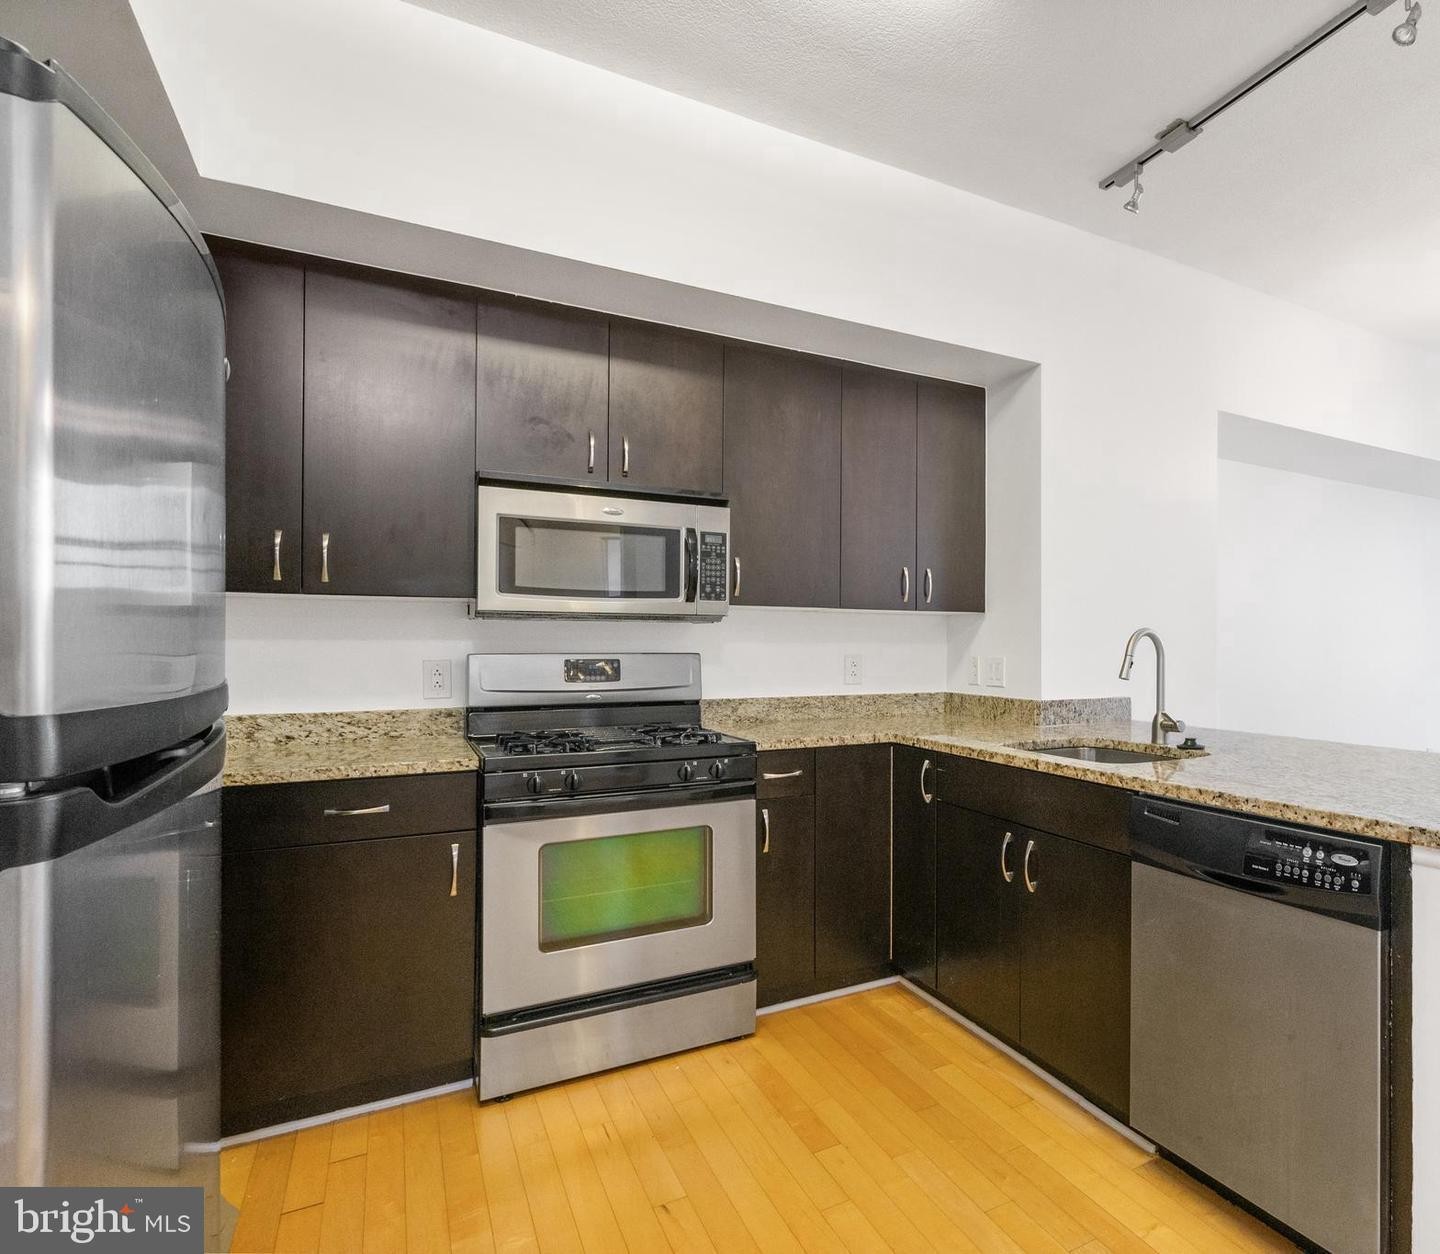 7. 475 K St NW 